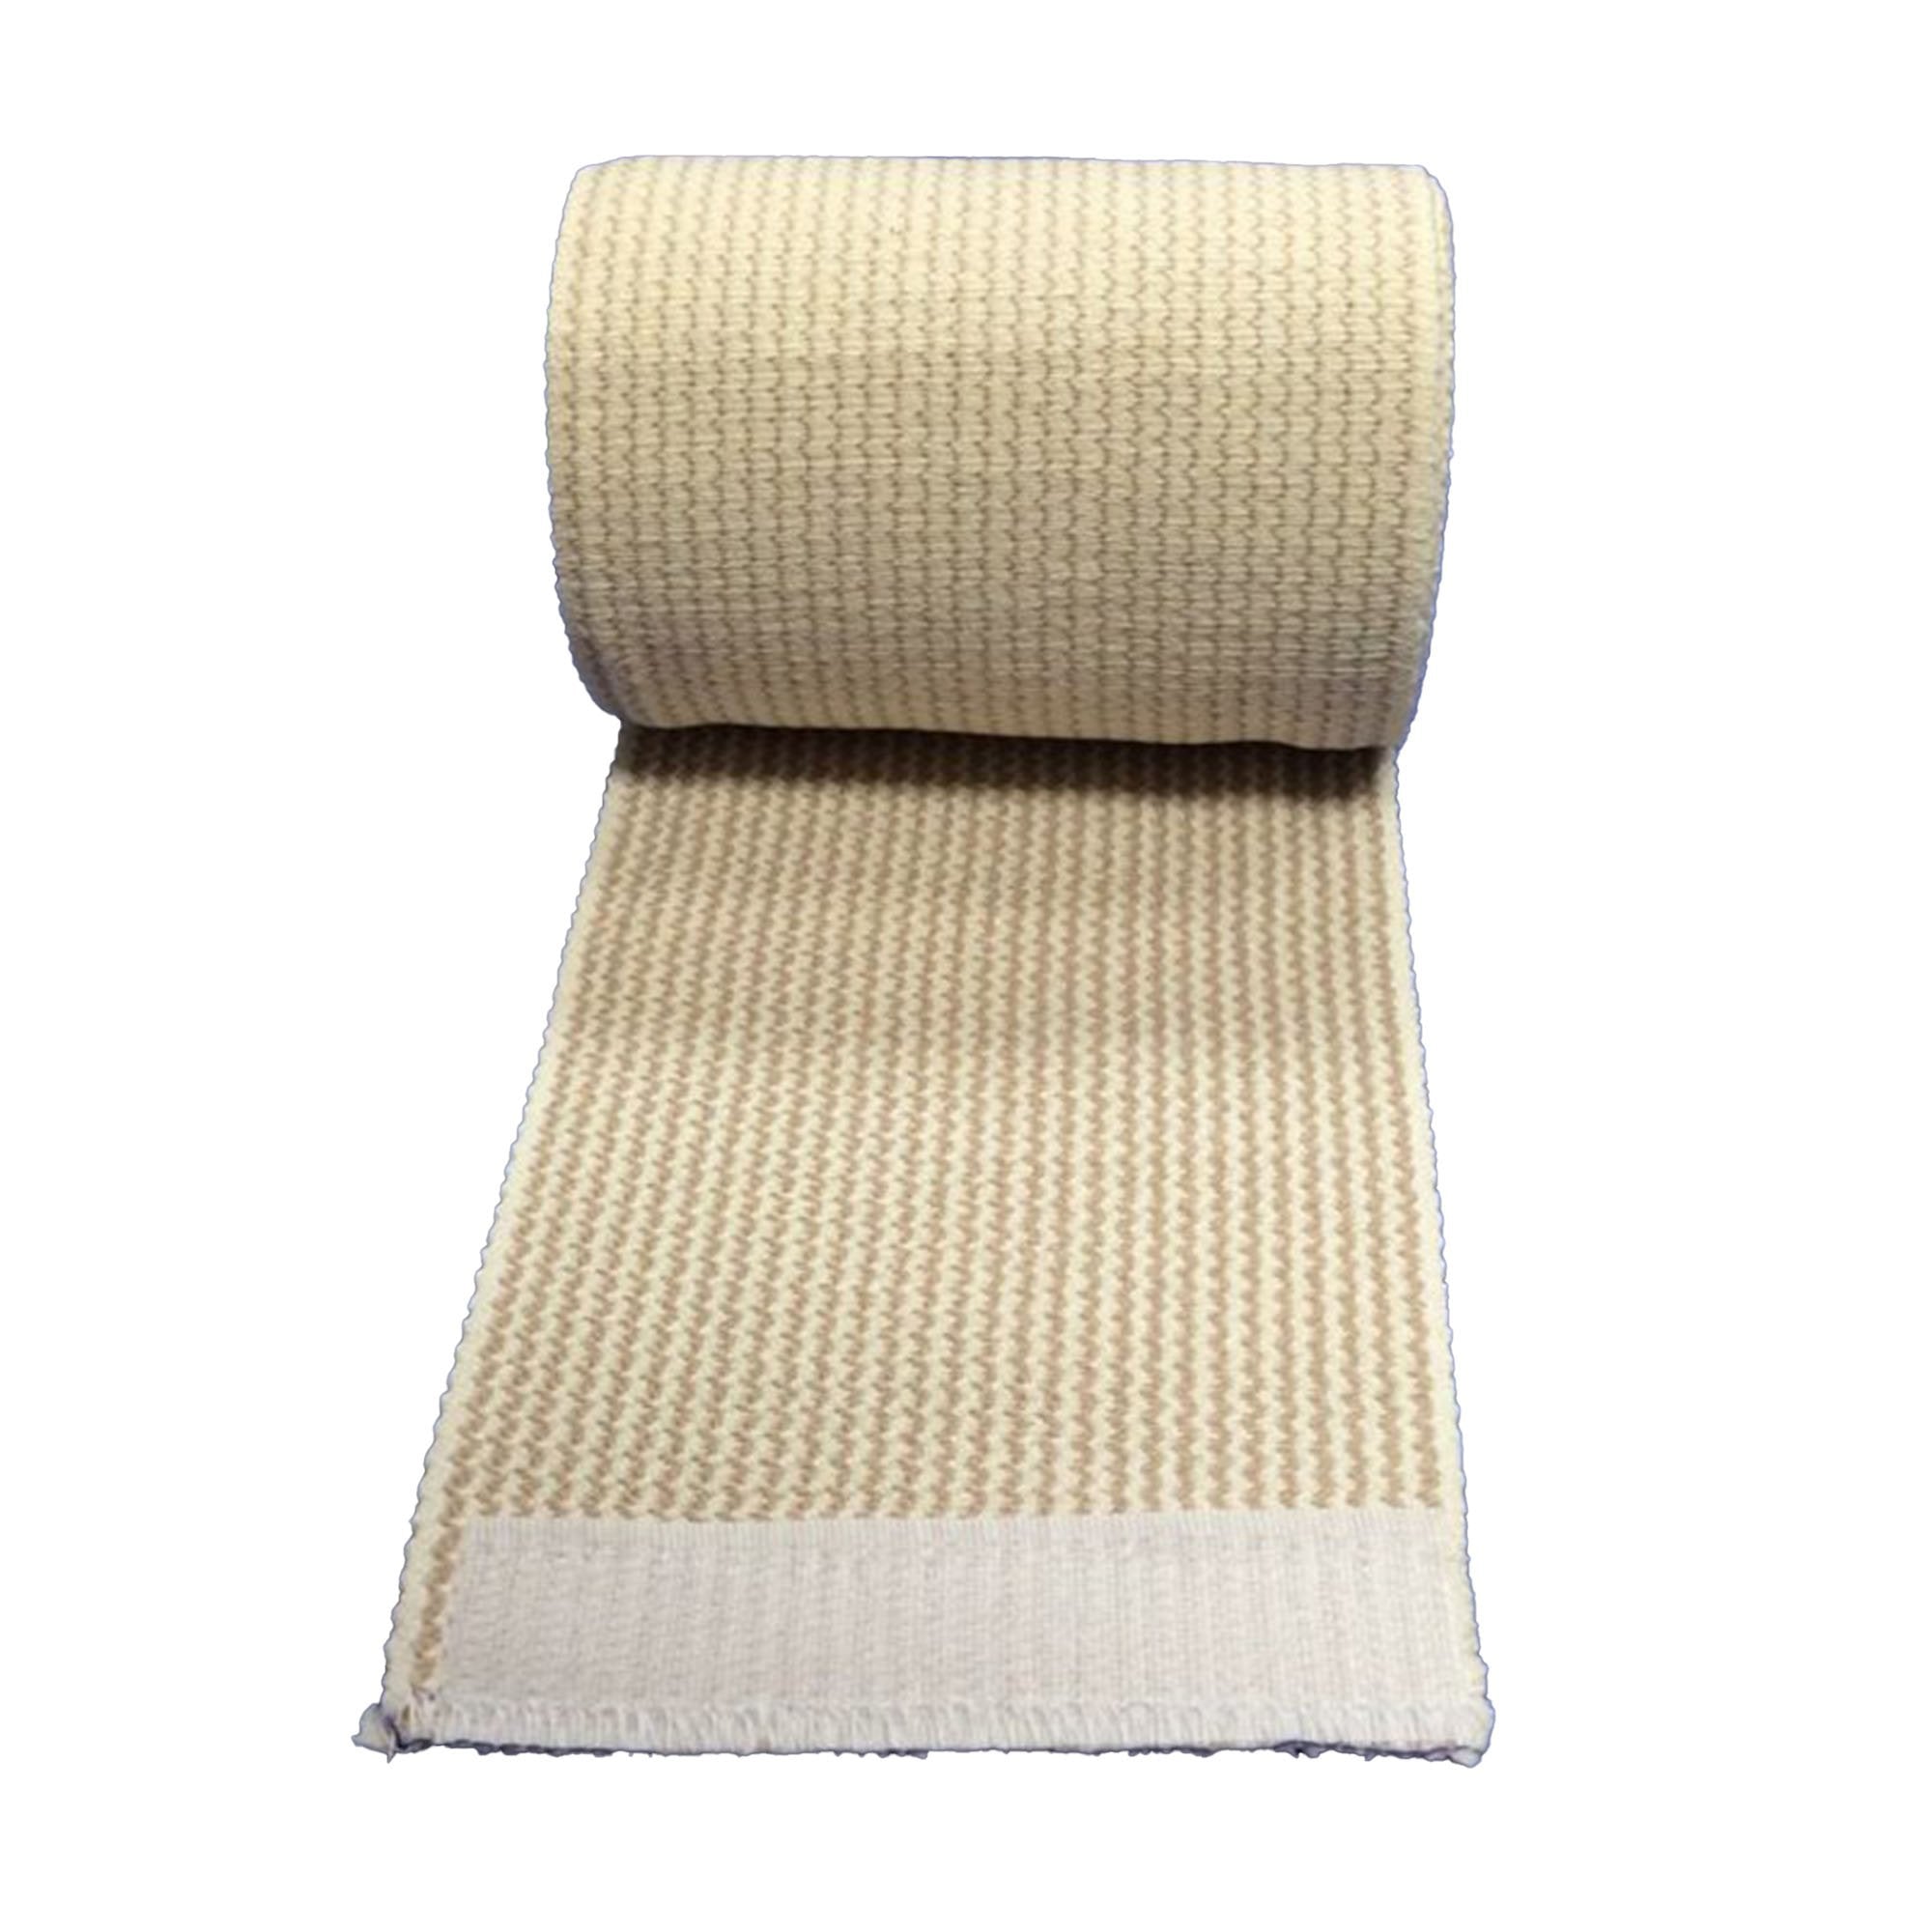 Elastic Bandage EZe-Band® LF 4 Inch X 11 Yard Double Length Double Hook and Loop Closure Tan NonSterile Standard Compression